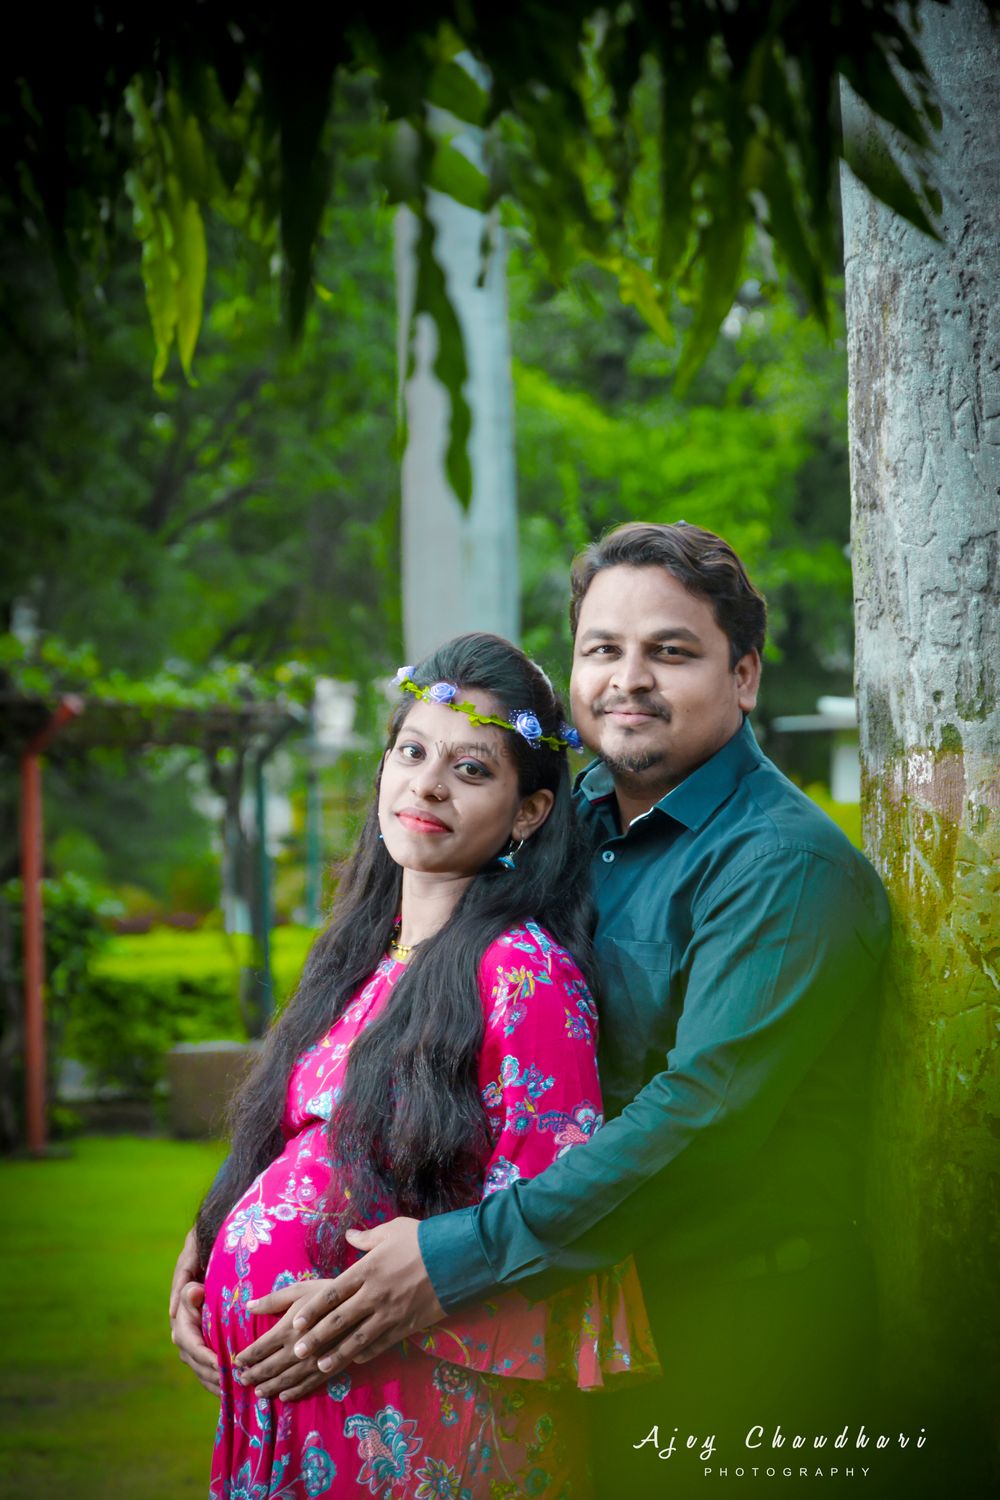 Photo From Maternity Shoot - By Ajey Chaudhari Photography